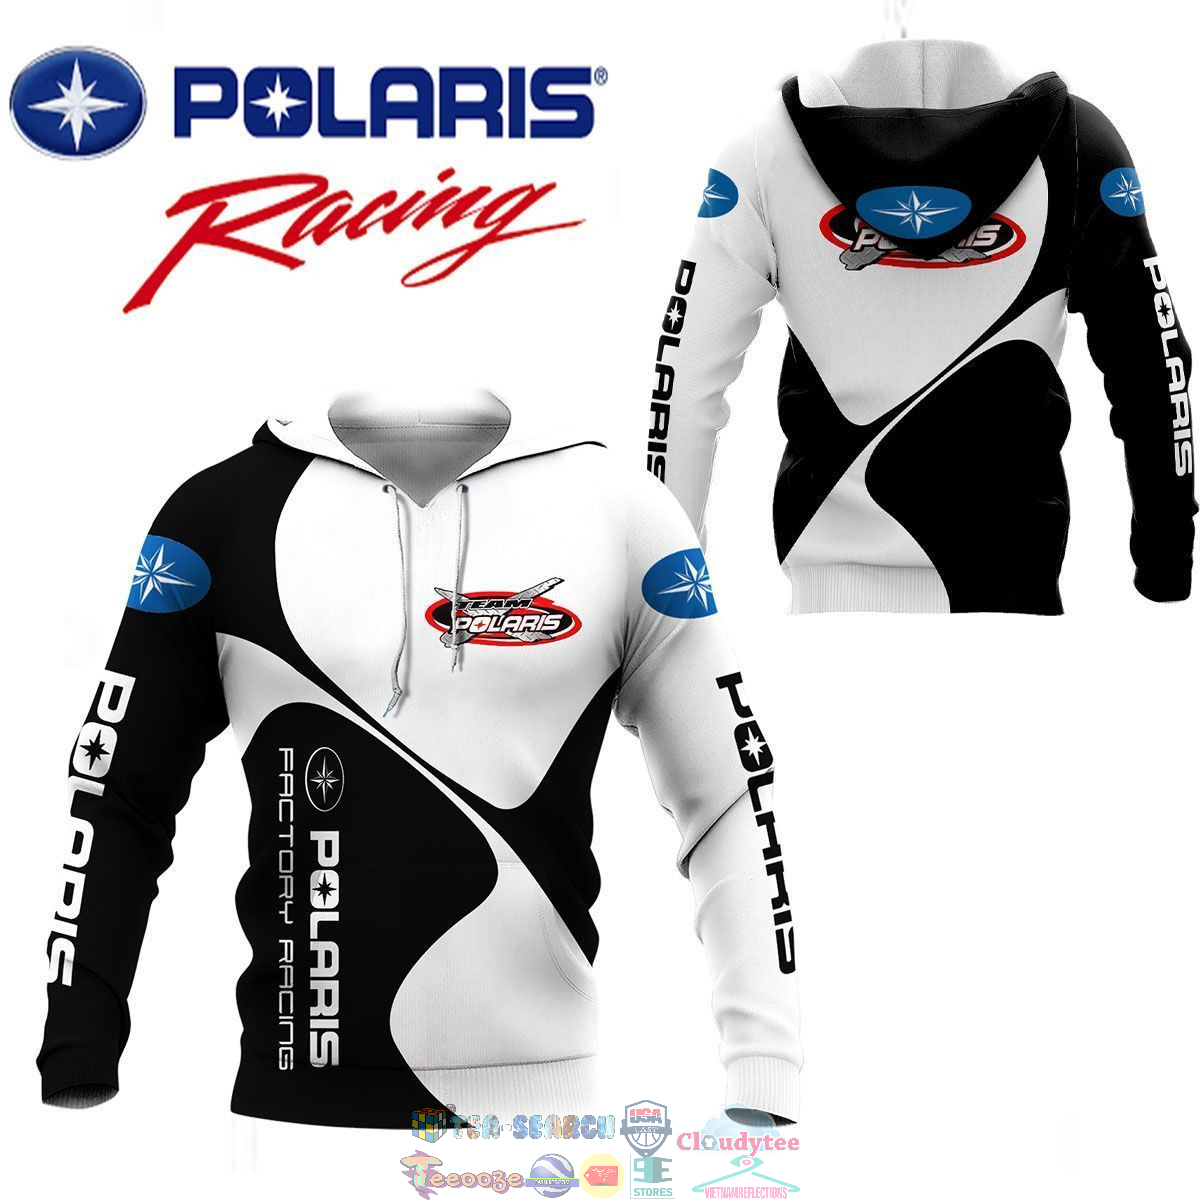 Polaris Factory Racing White 3D hoodie and t-shirt